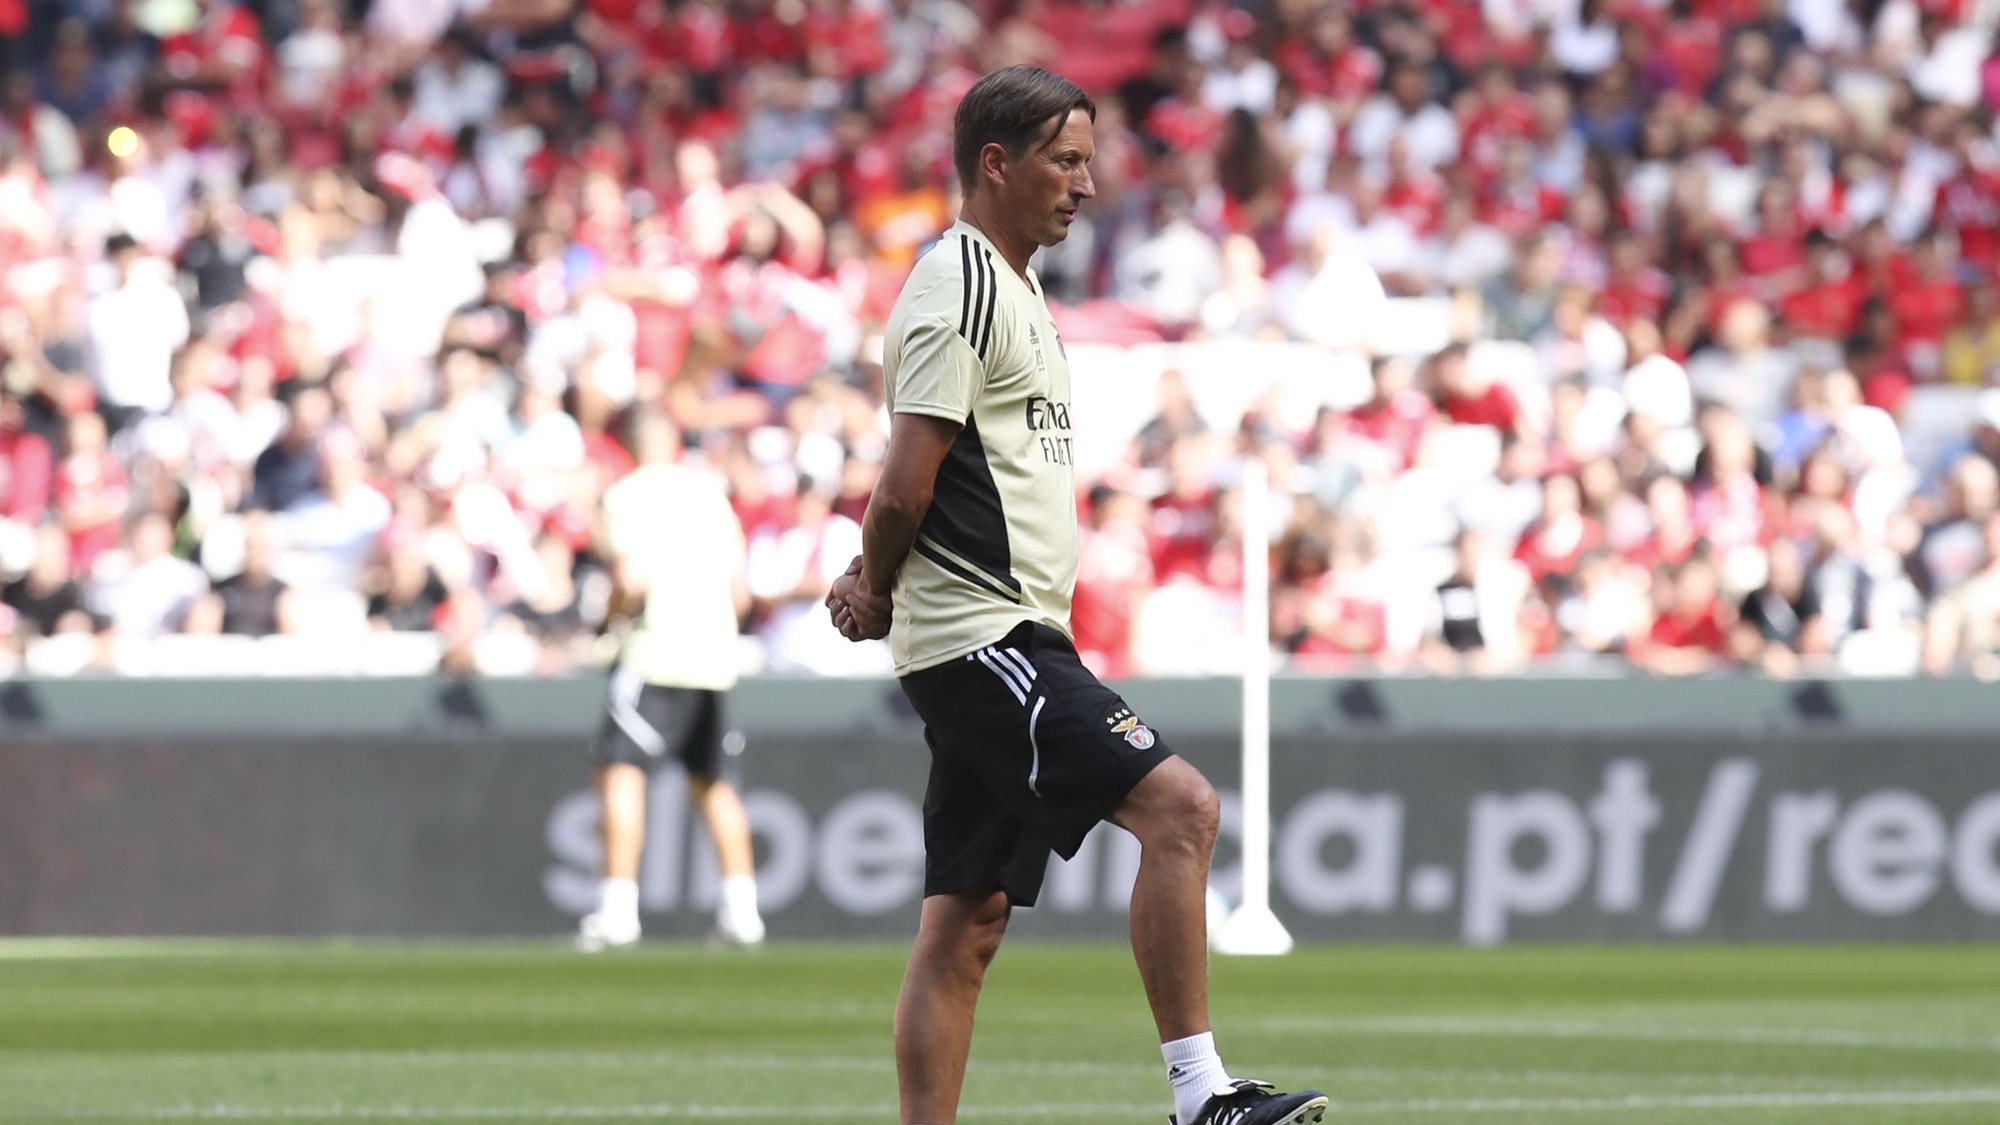 The new coach of the Benfica team, Roger Schmidt, during the first training session open to members and supporters at the Luz stadium in Lisbon, Portugal, July 3, 2022. ANTÓNIO COTRIM/LUSA